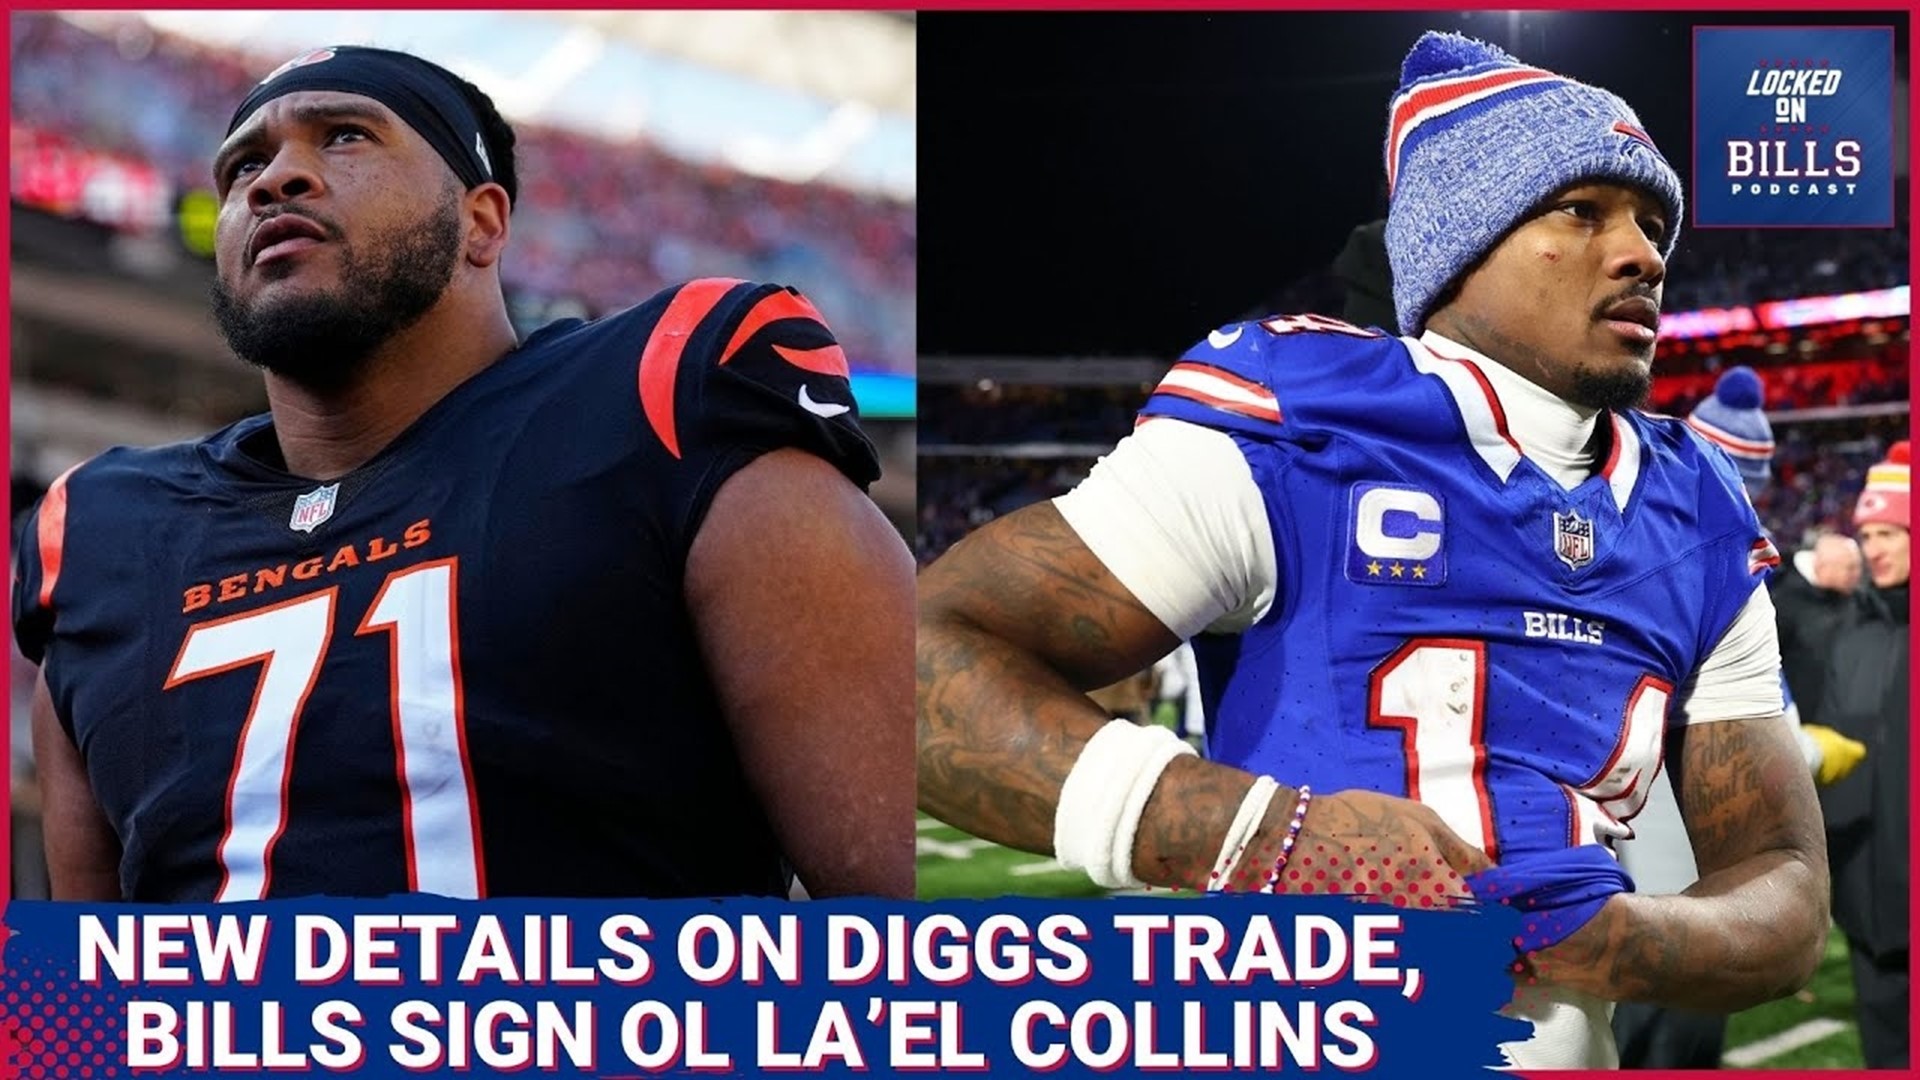 The Buffalo Bills signed veteran OL La’El Collins and new details emerged on the Stefon Diggs trade that lead to an updated perspective.